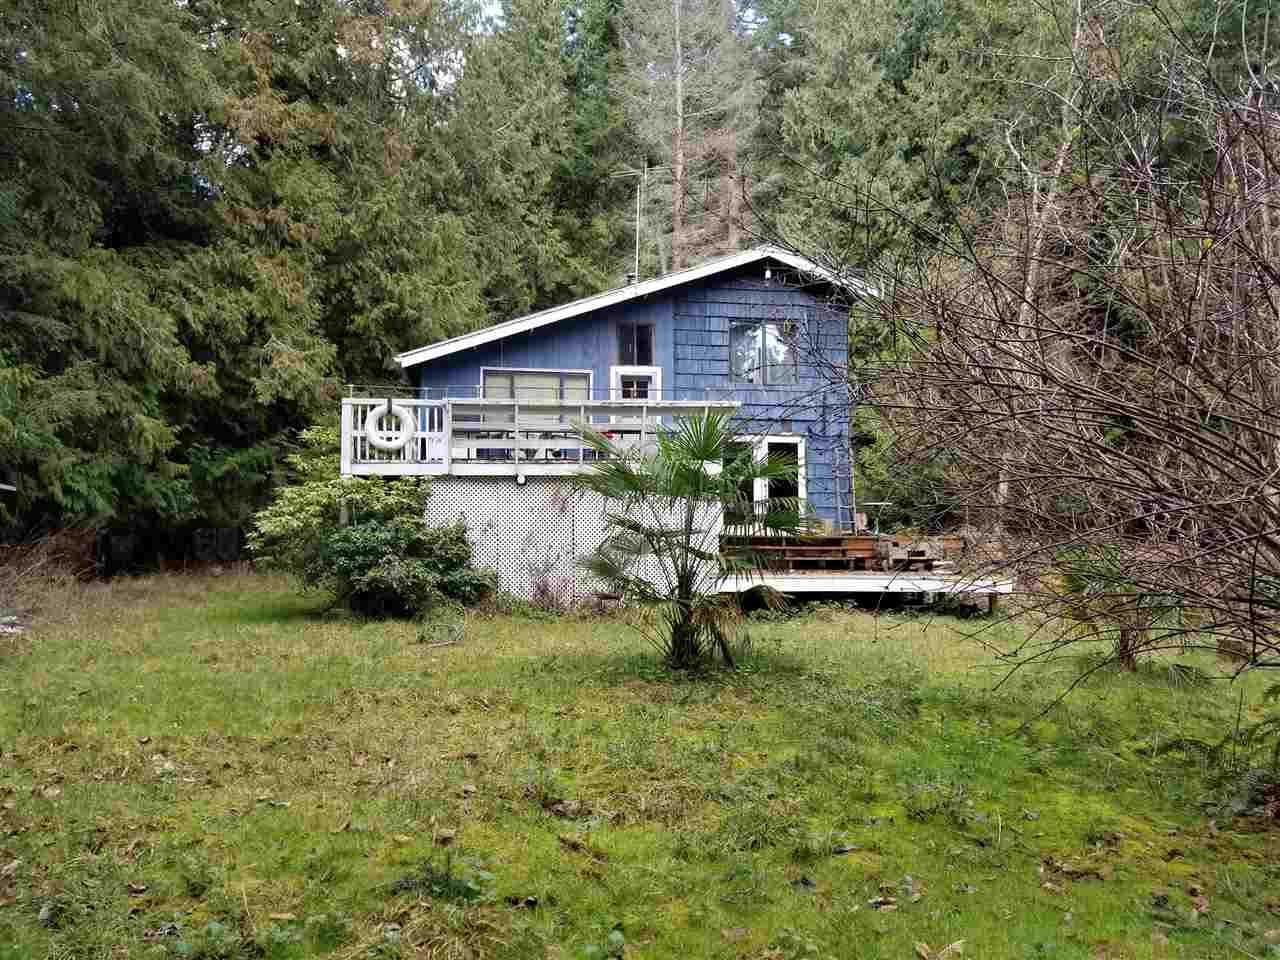 Main Photo: 5011 PHILLIMORE POINT ROAD in : Galiano Island House for sale : MLS®# R2411065